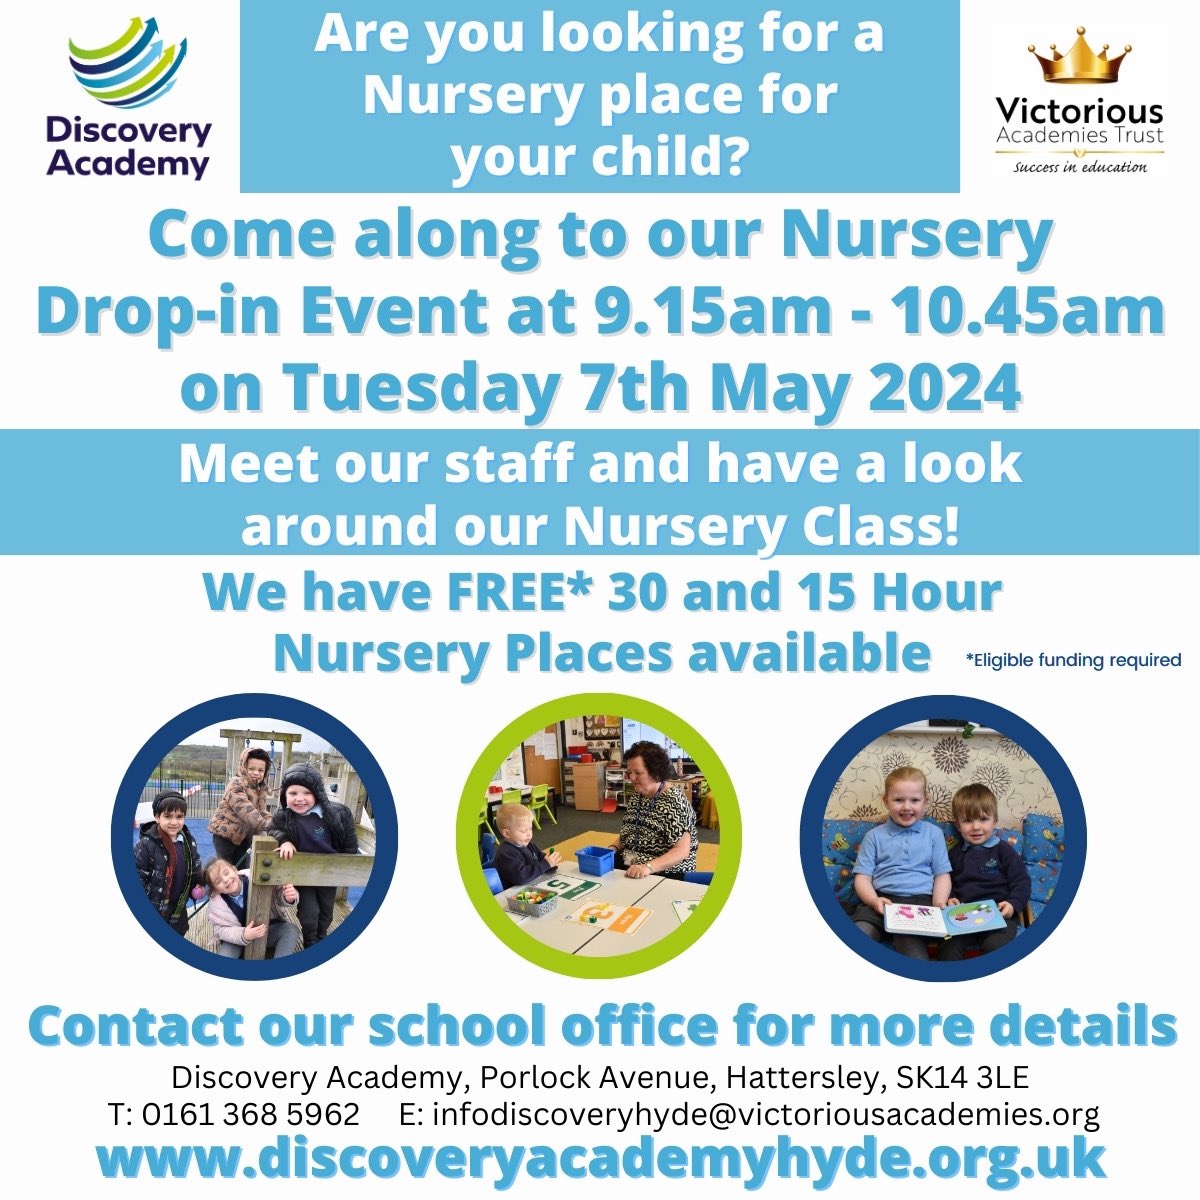 This is a drop in event. Come anytime, meet the staff, have a chat and a tour of our EYFS provision. We look forward to welcoming you to our wonderful Academy! 💙💚